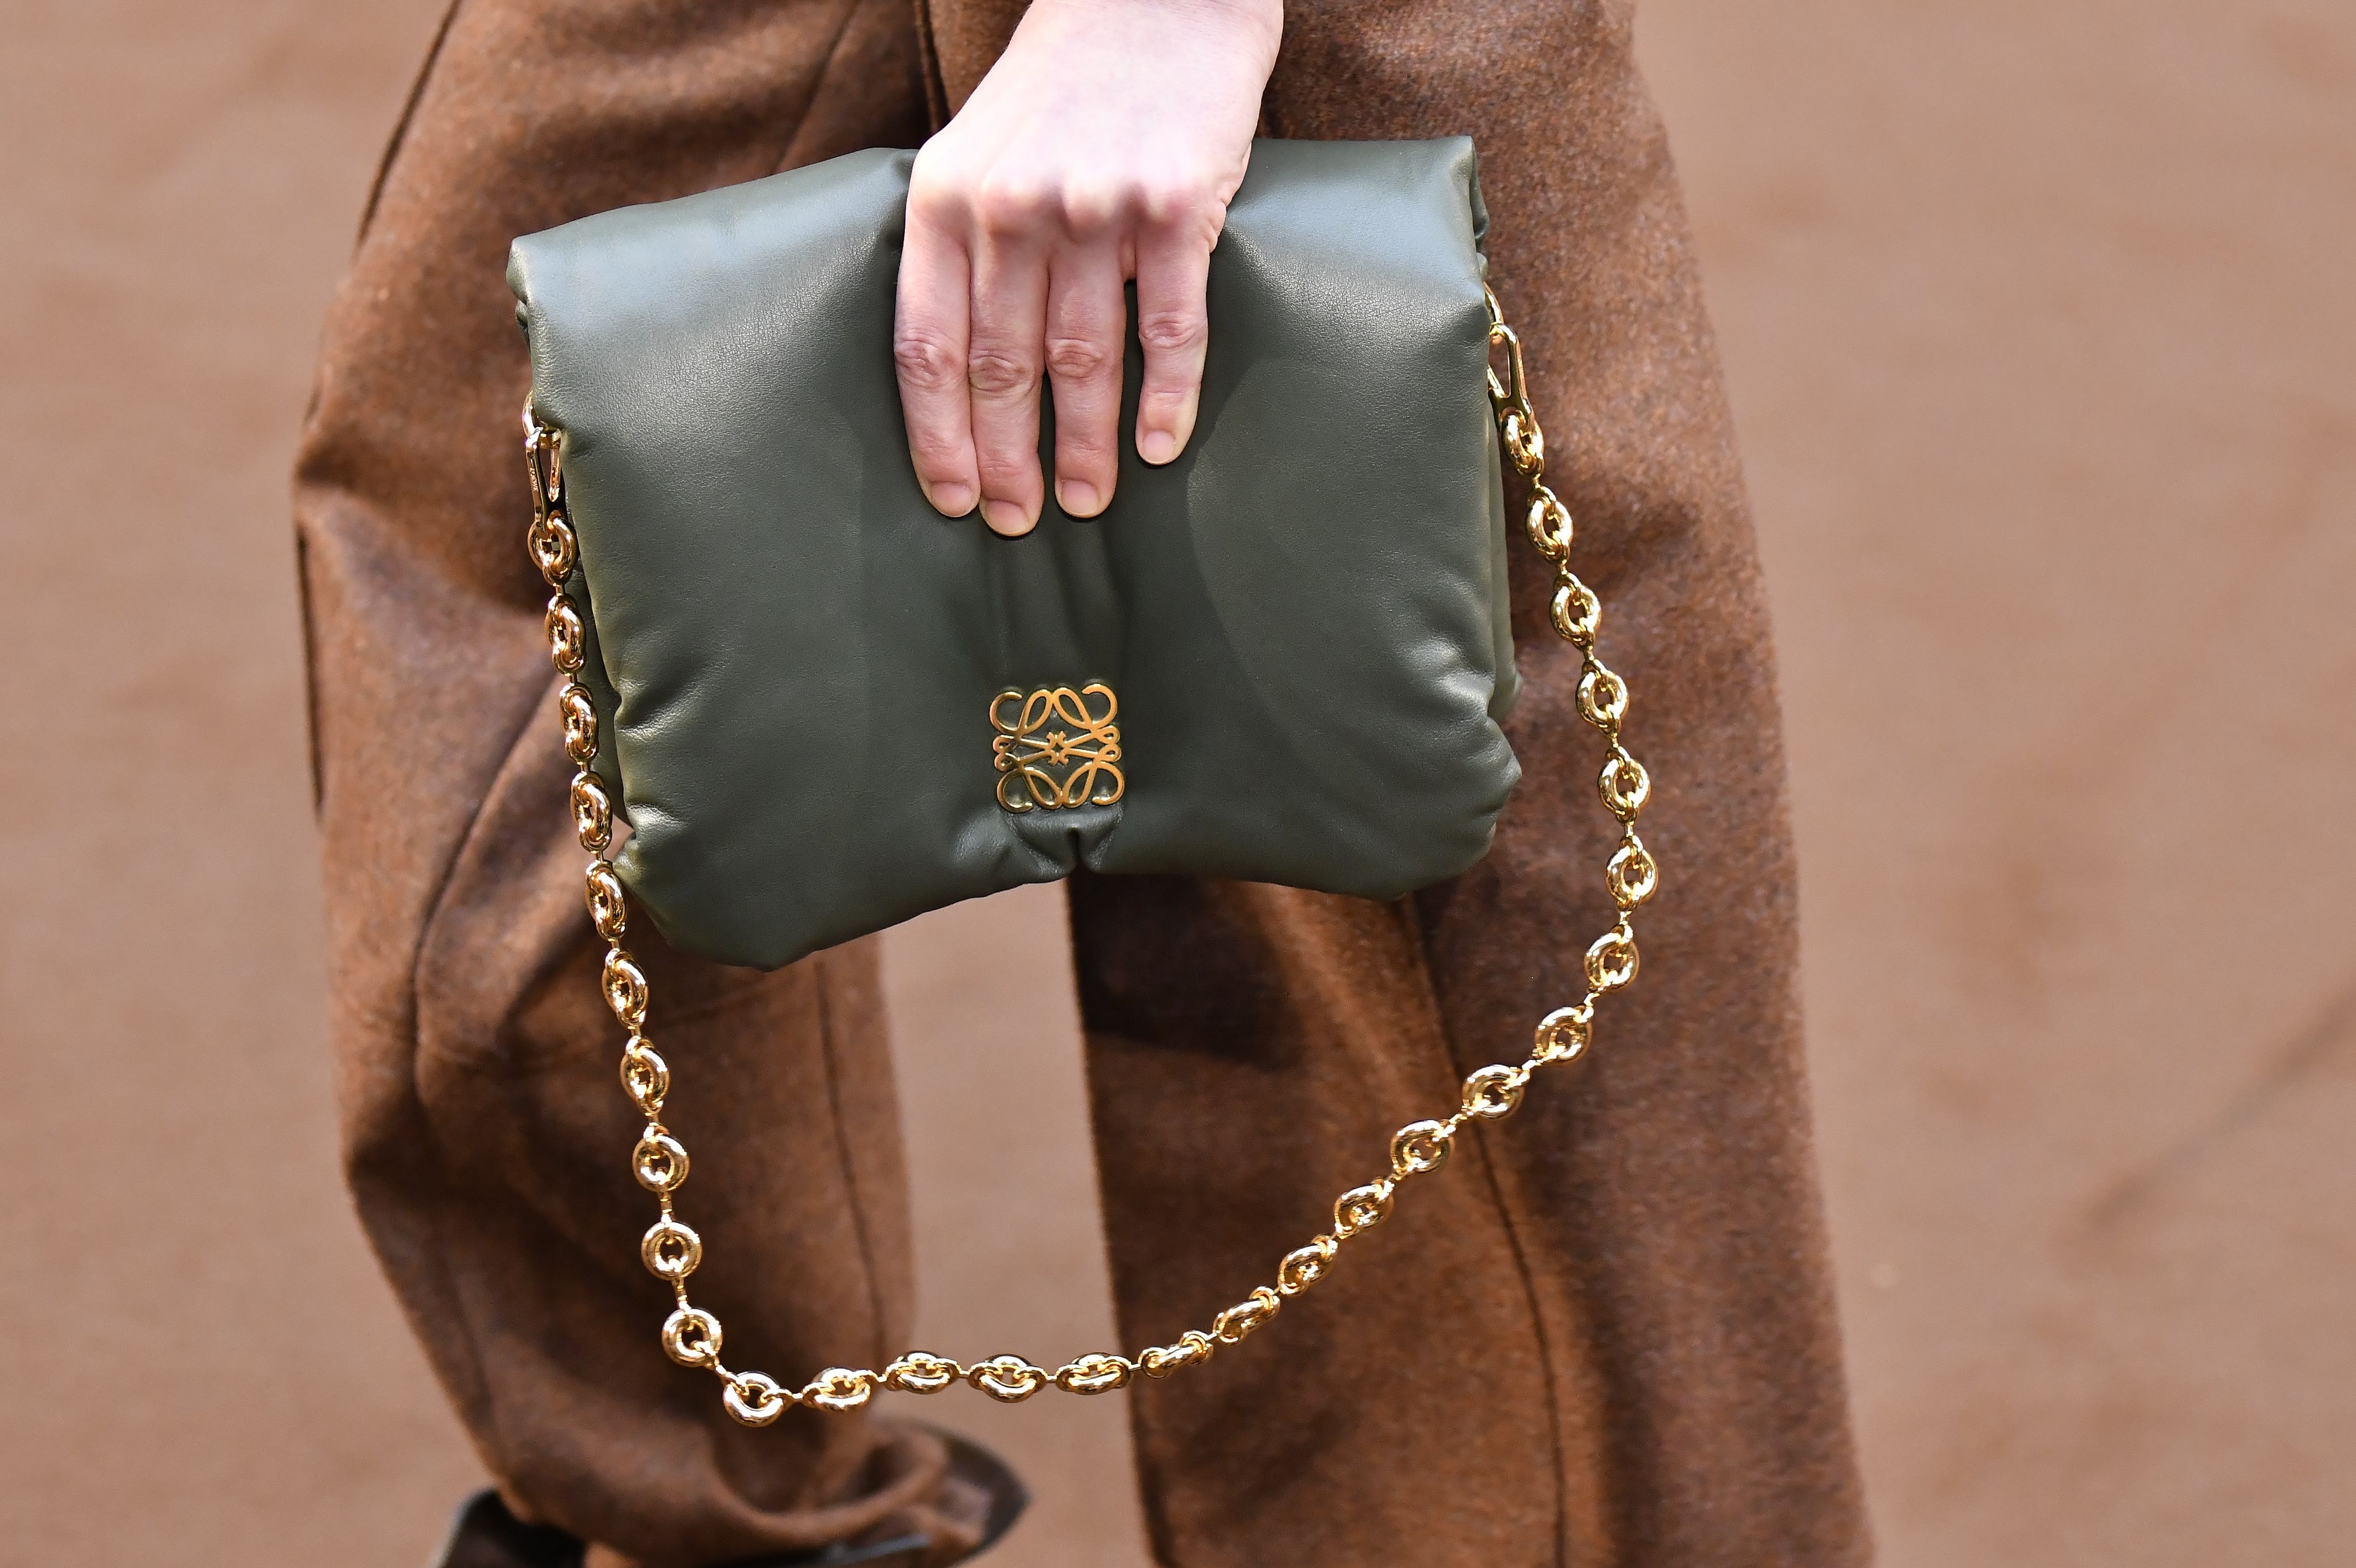 6 Cute Winter Bag Trends for 2021 and 2022—Shop Winter Bag Trends